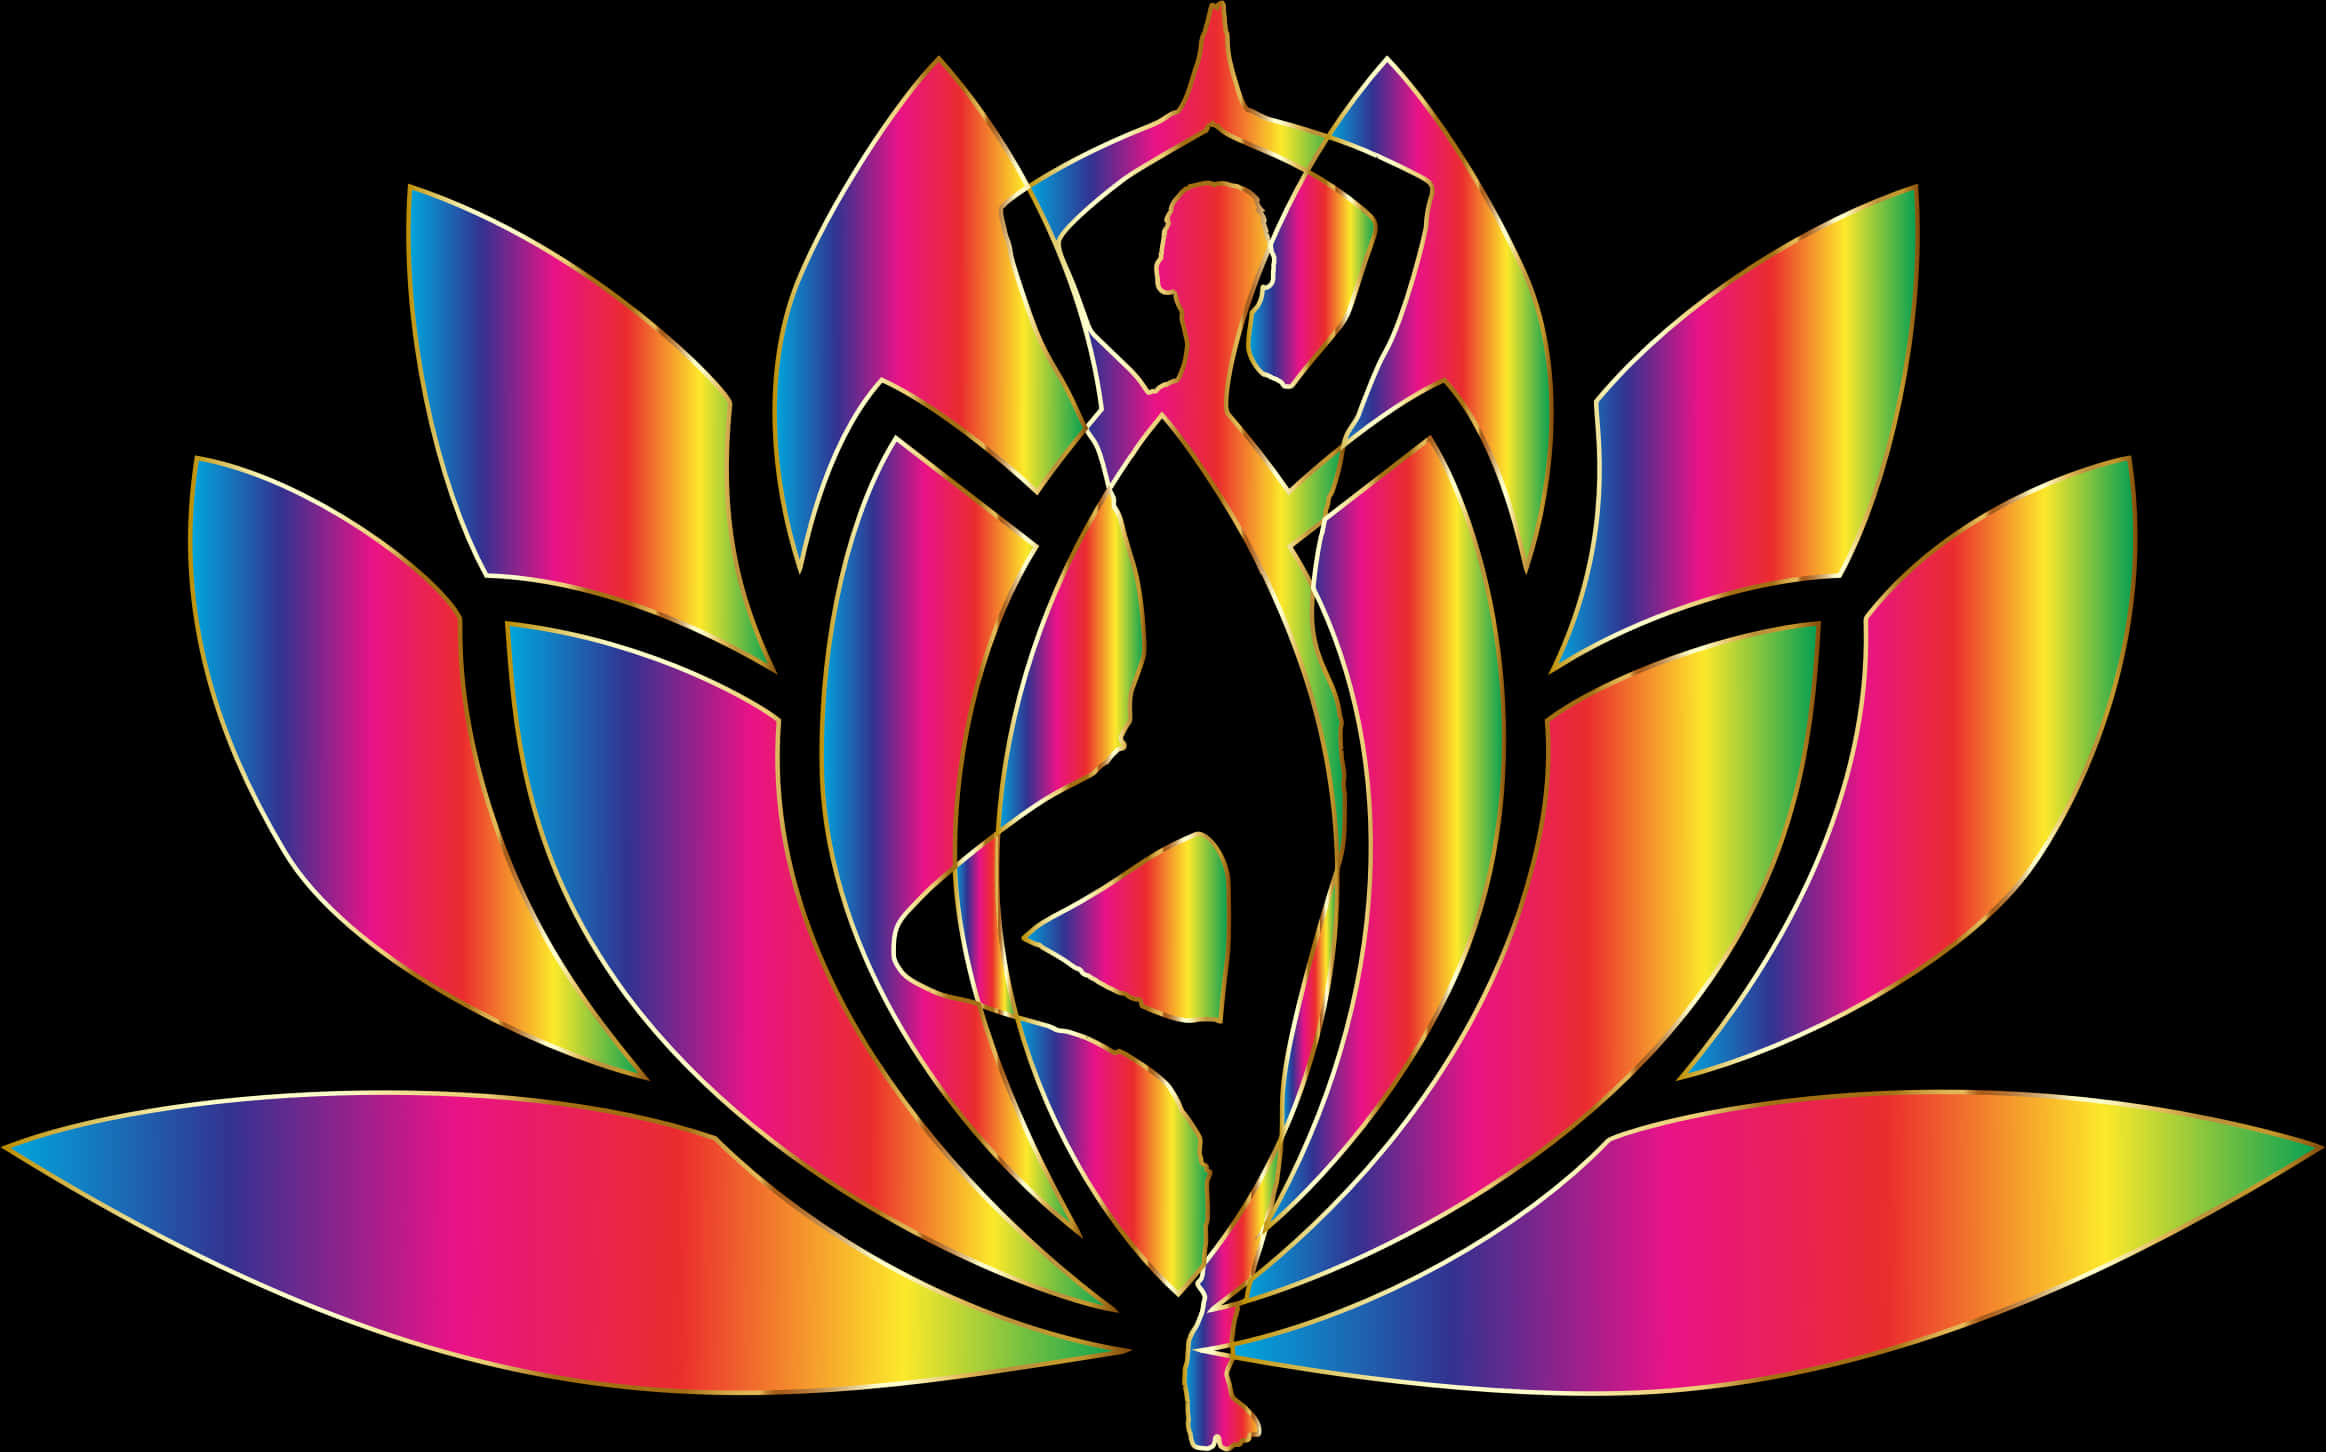 A Colorful Lotus Flower With A Silhouette Of A Woman